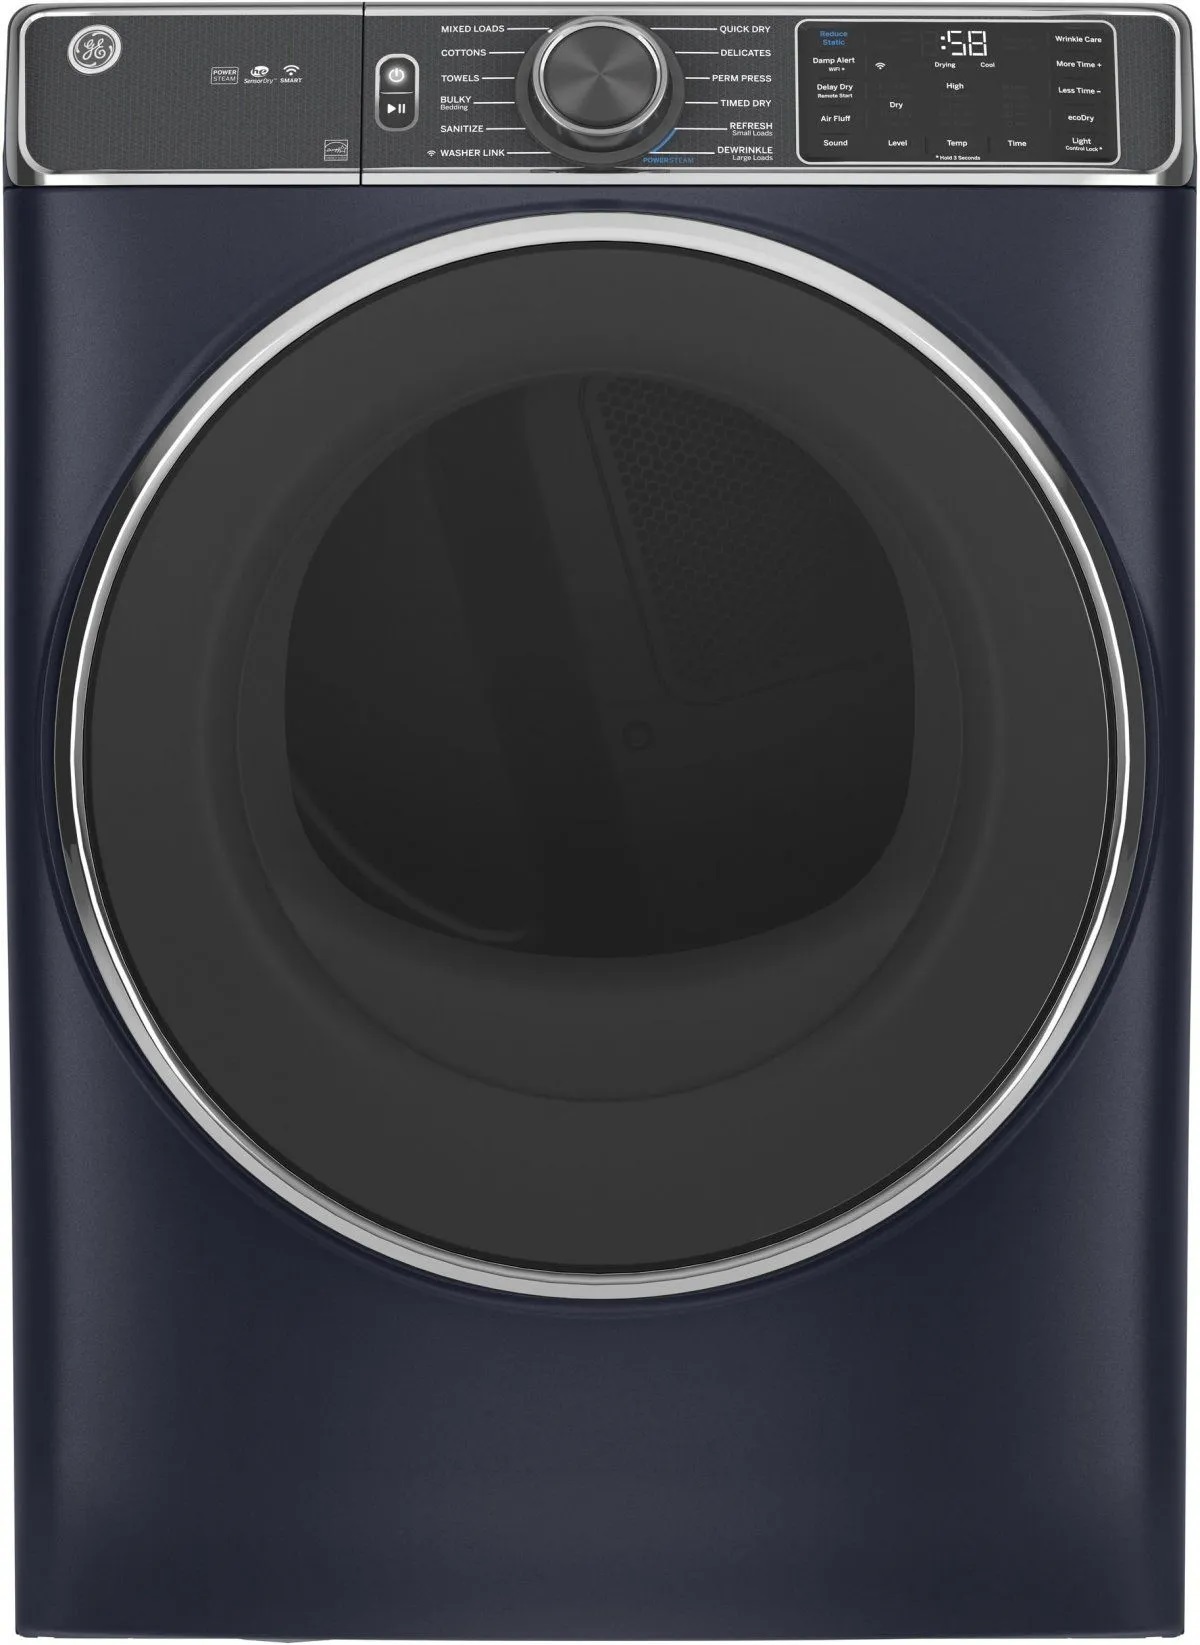 navy blue dryer with silver accents 